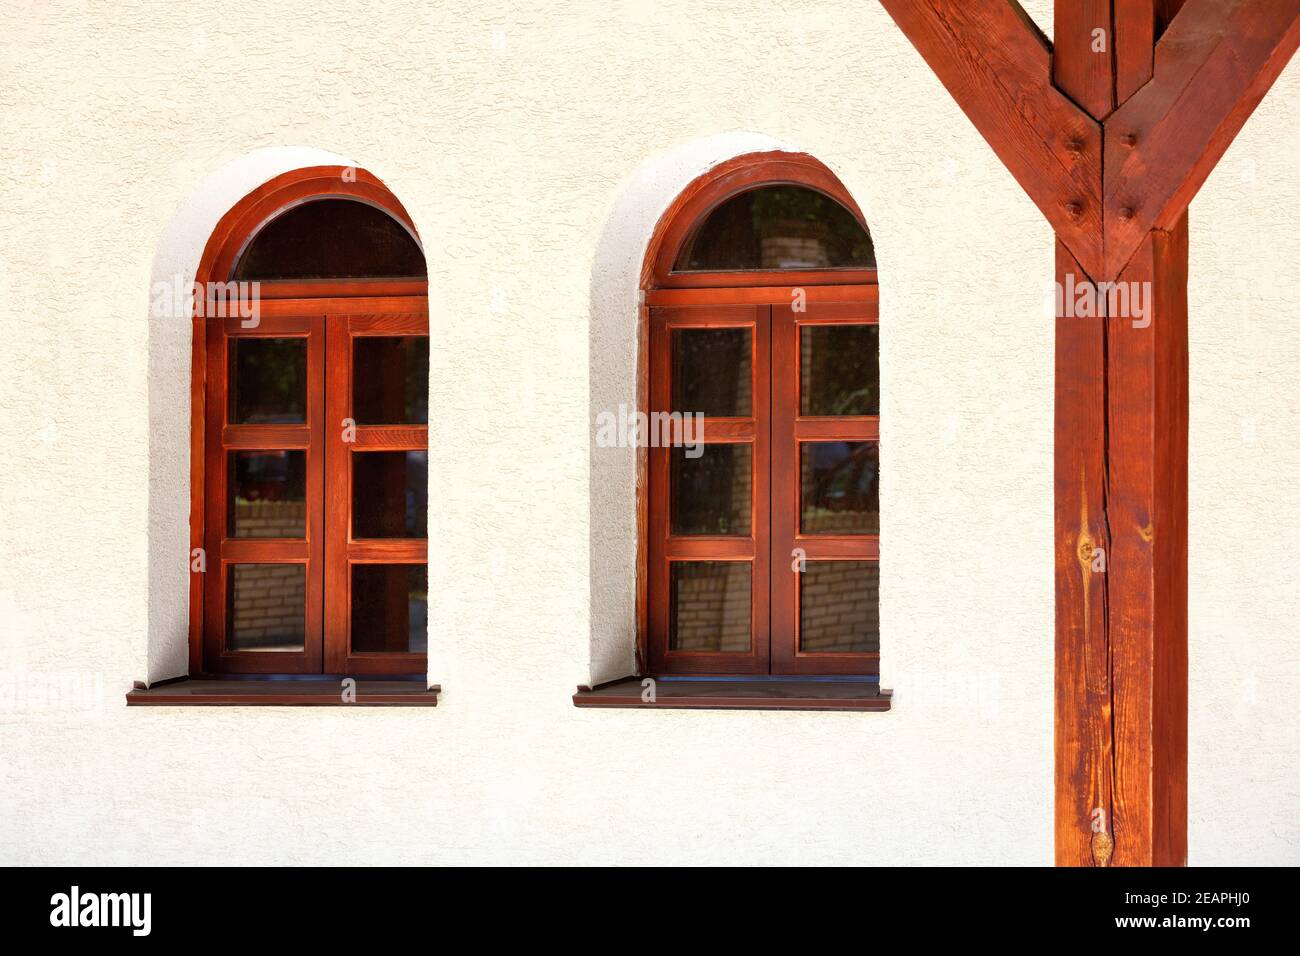 View of the terrace of an old Ukrainian rural hut with antique arched windows and a wooden support post. Stock Photo